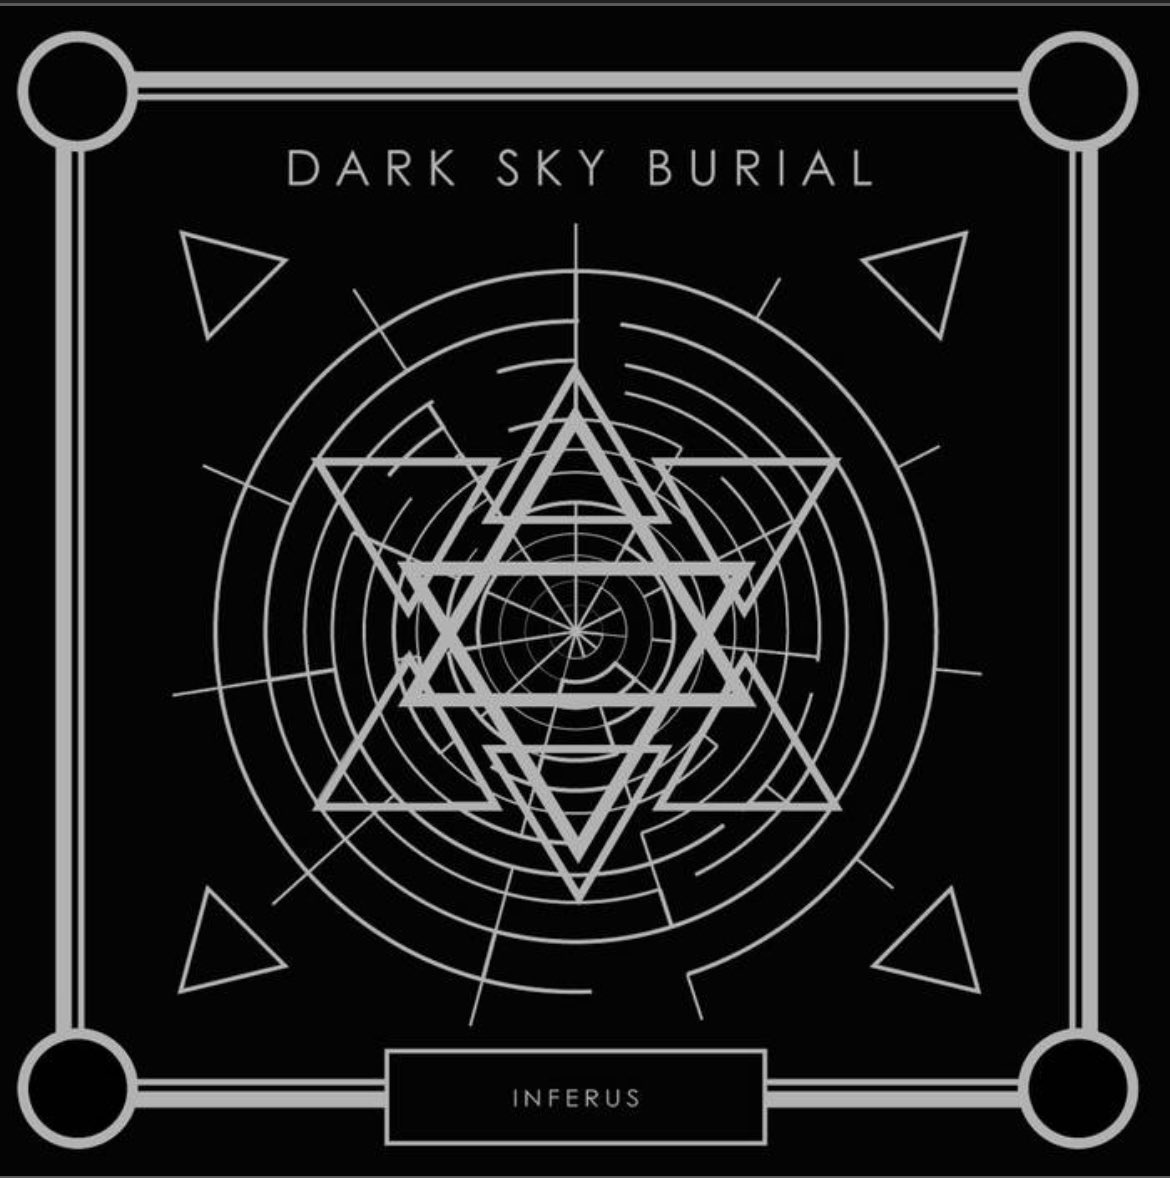 The new @darkskyburial album #inferus available @Bandcamp thanks as ever for the support